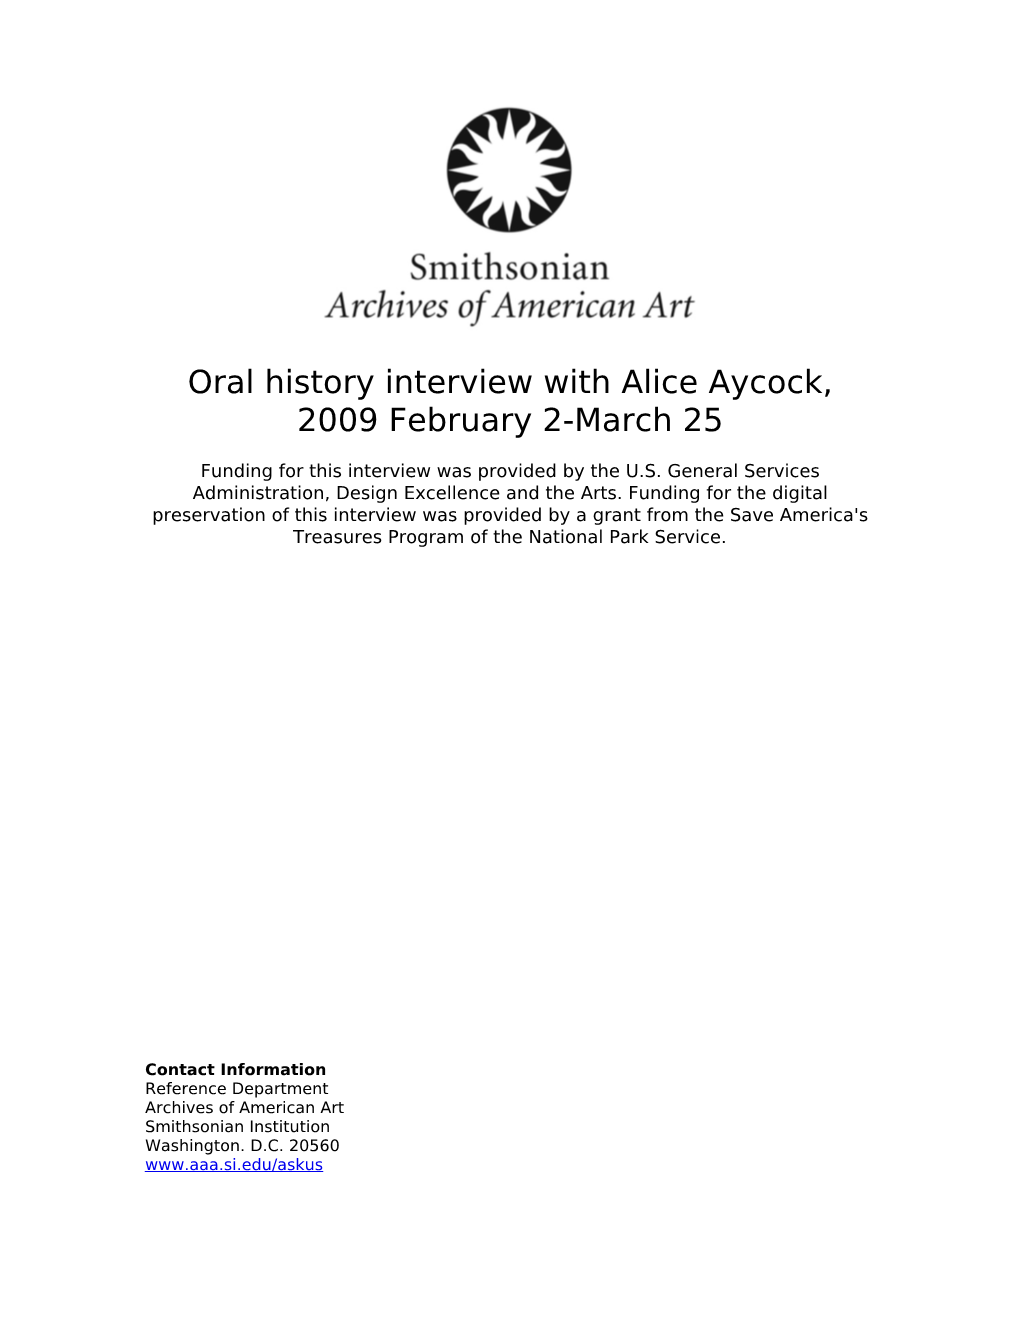 Oral History Interview with Alice Aycock, 2009 February 2-March 25